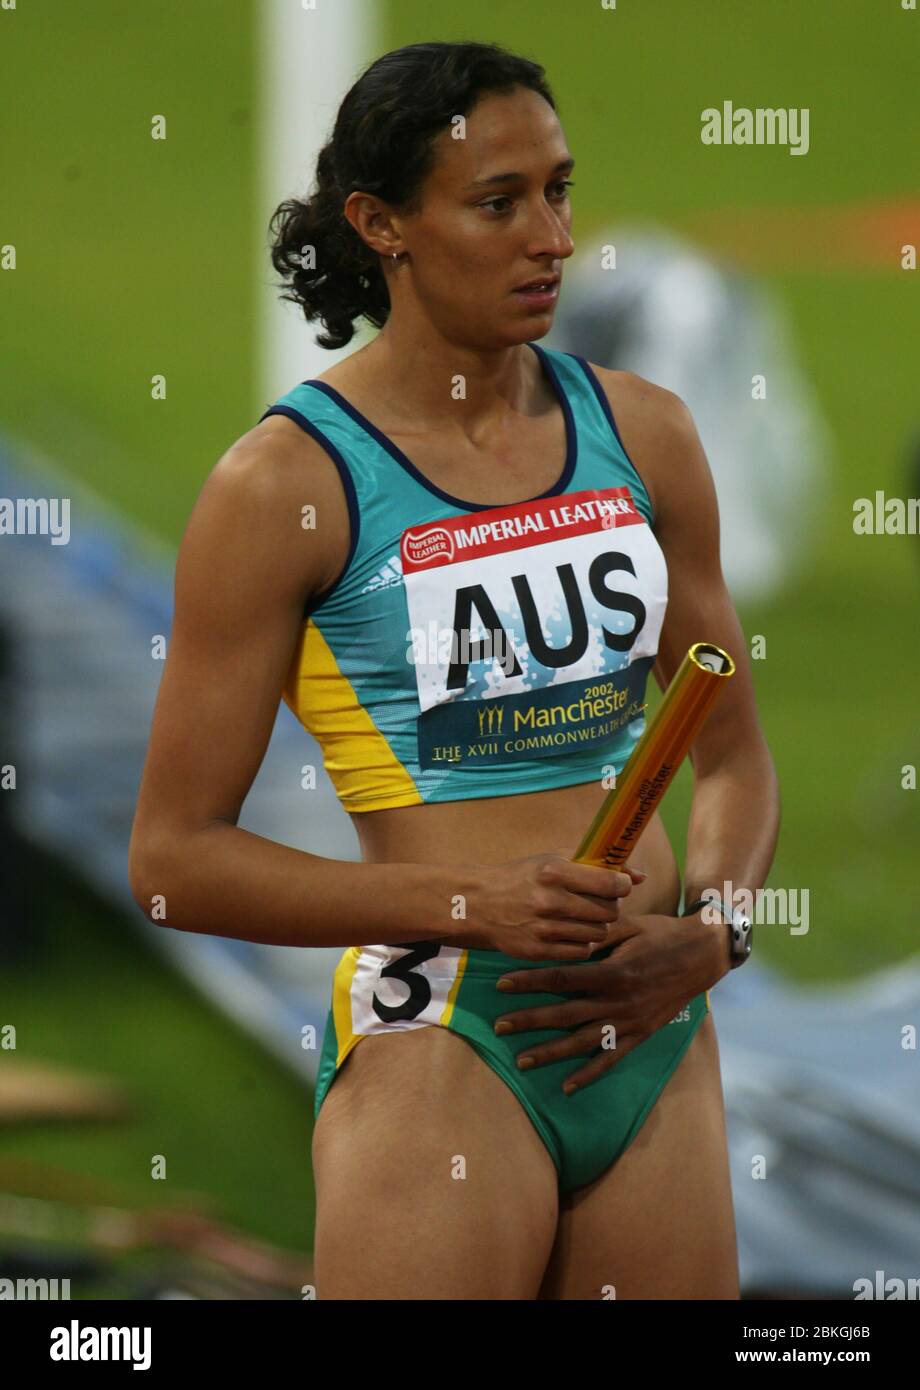 MANCHESTER - JULY 30: Kylie WHEELER of Australia first Leg compete in Women's 4 x 400m Semi-Final 1 at City of Manchester Stadium during the 2002 Comm Stock Photo